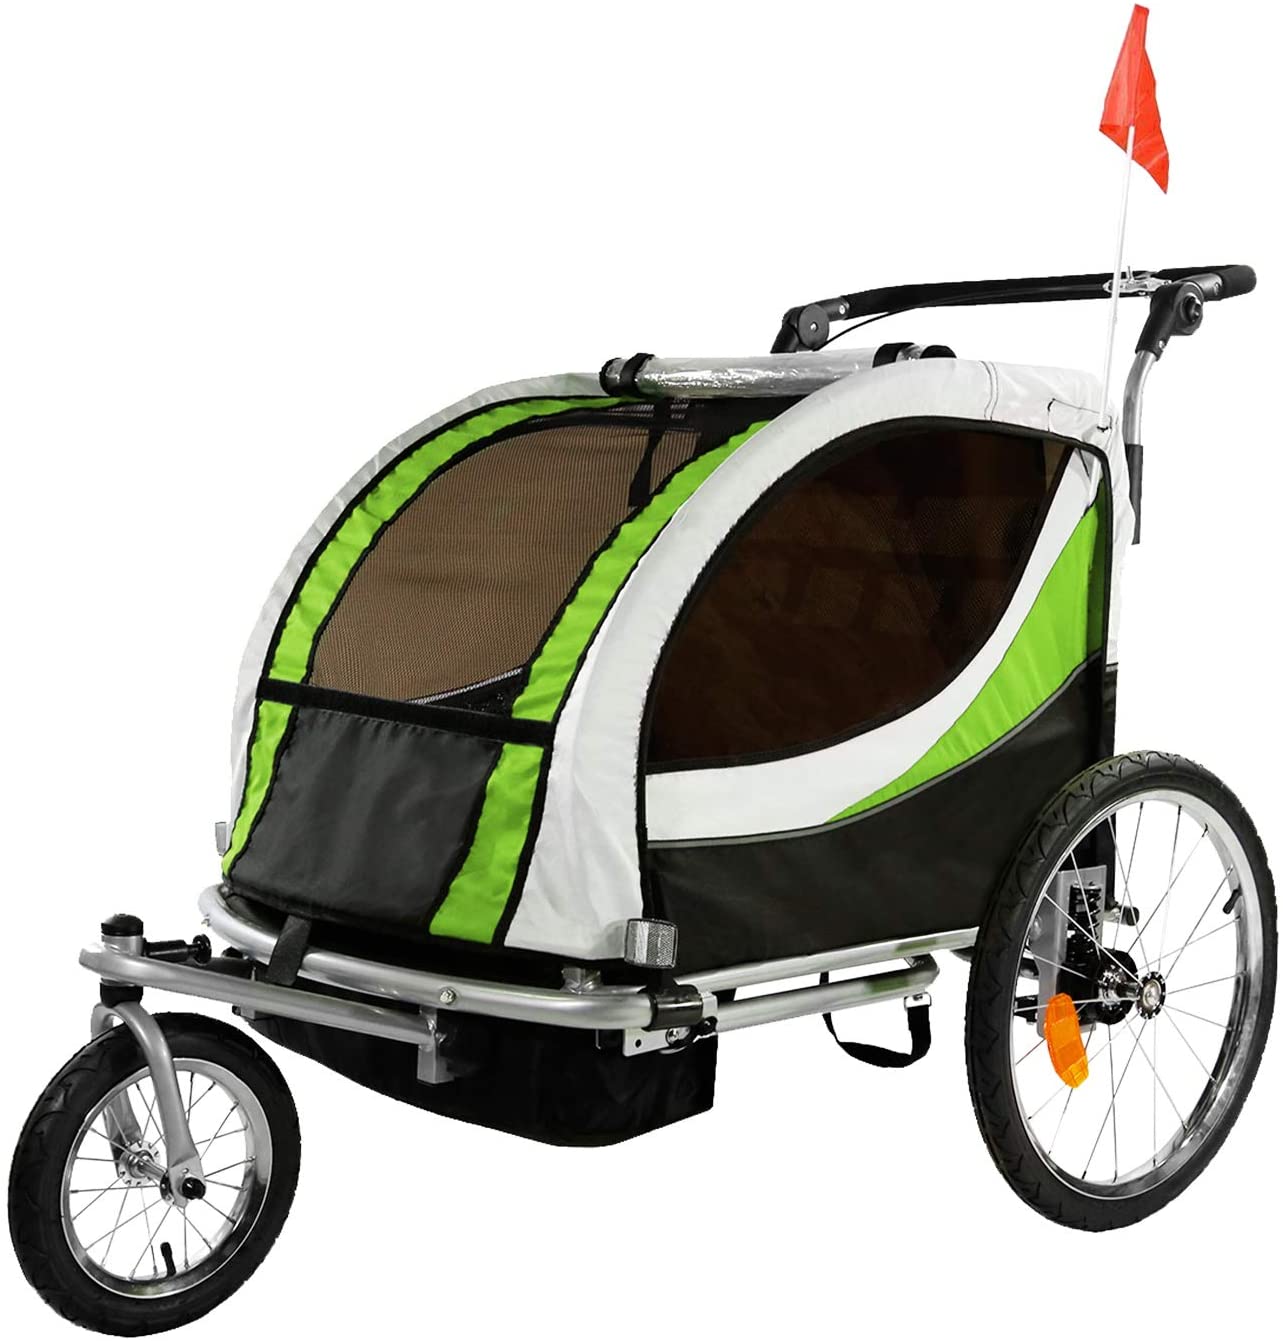 Review of ClevrPlus Deluxe 3-in-1 Double 2 Seat Bicycle Bike Trailer Jogger Stroller